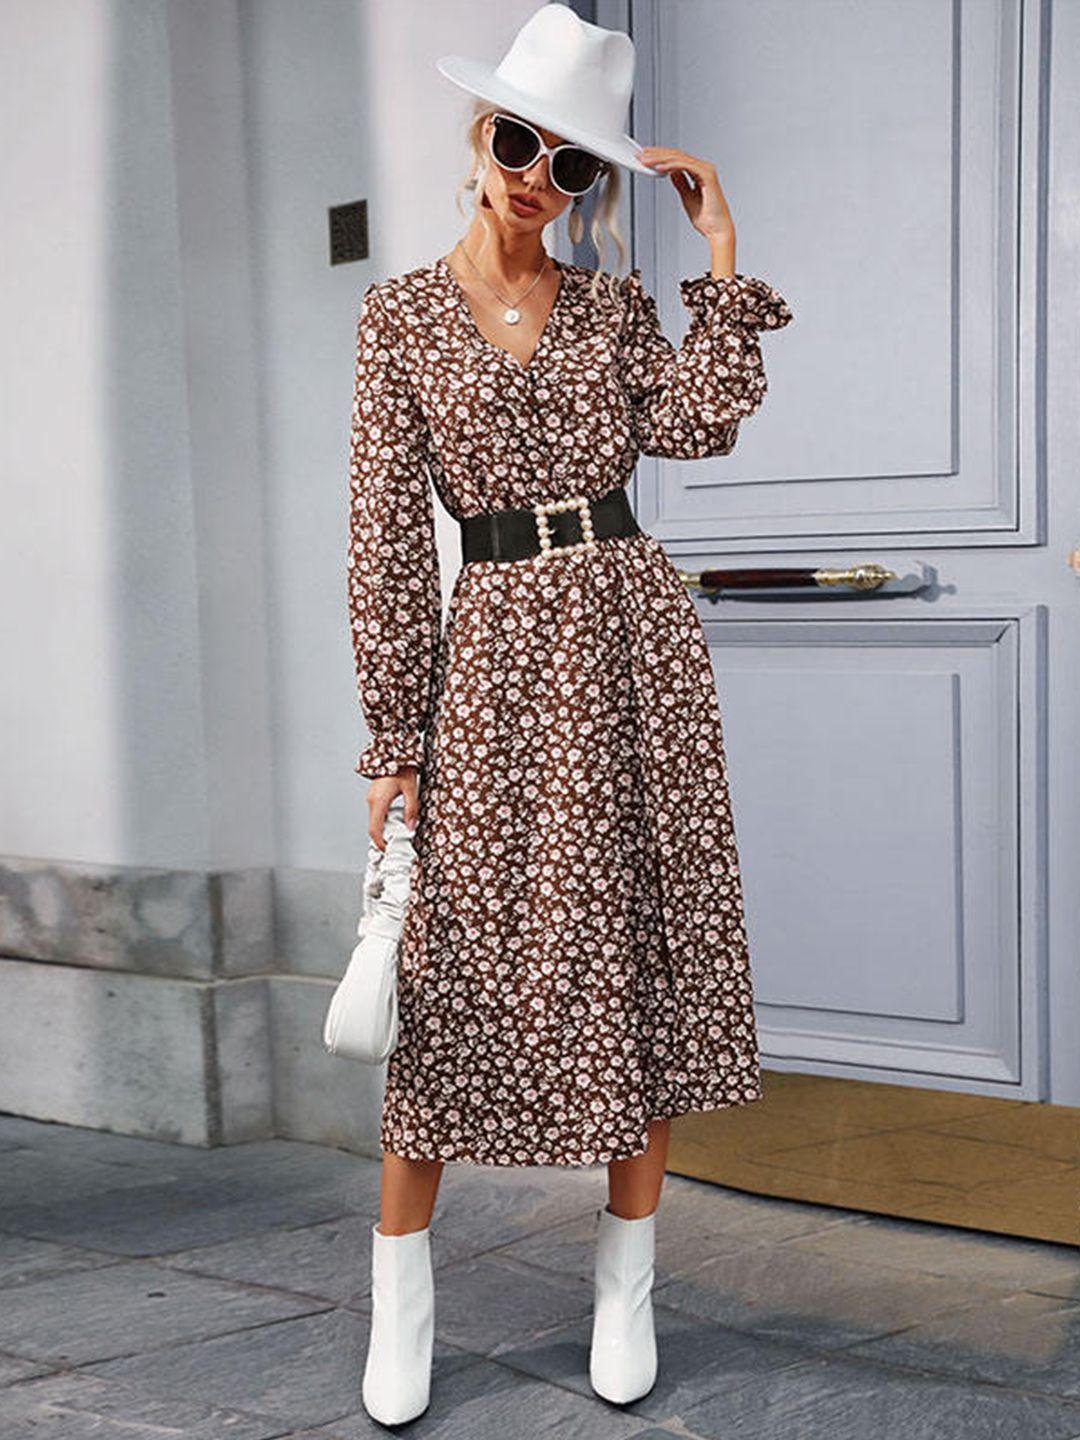 stylecast-brown-&-white-floral-printed-a-line-midi-dress